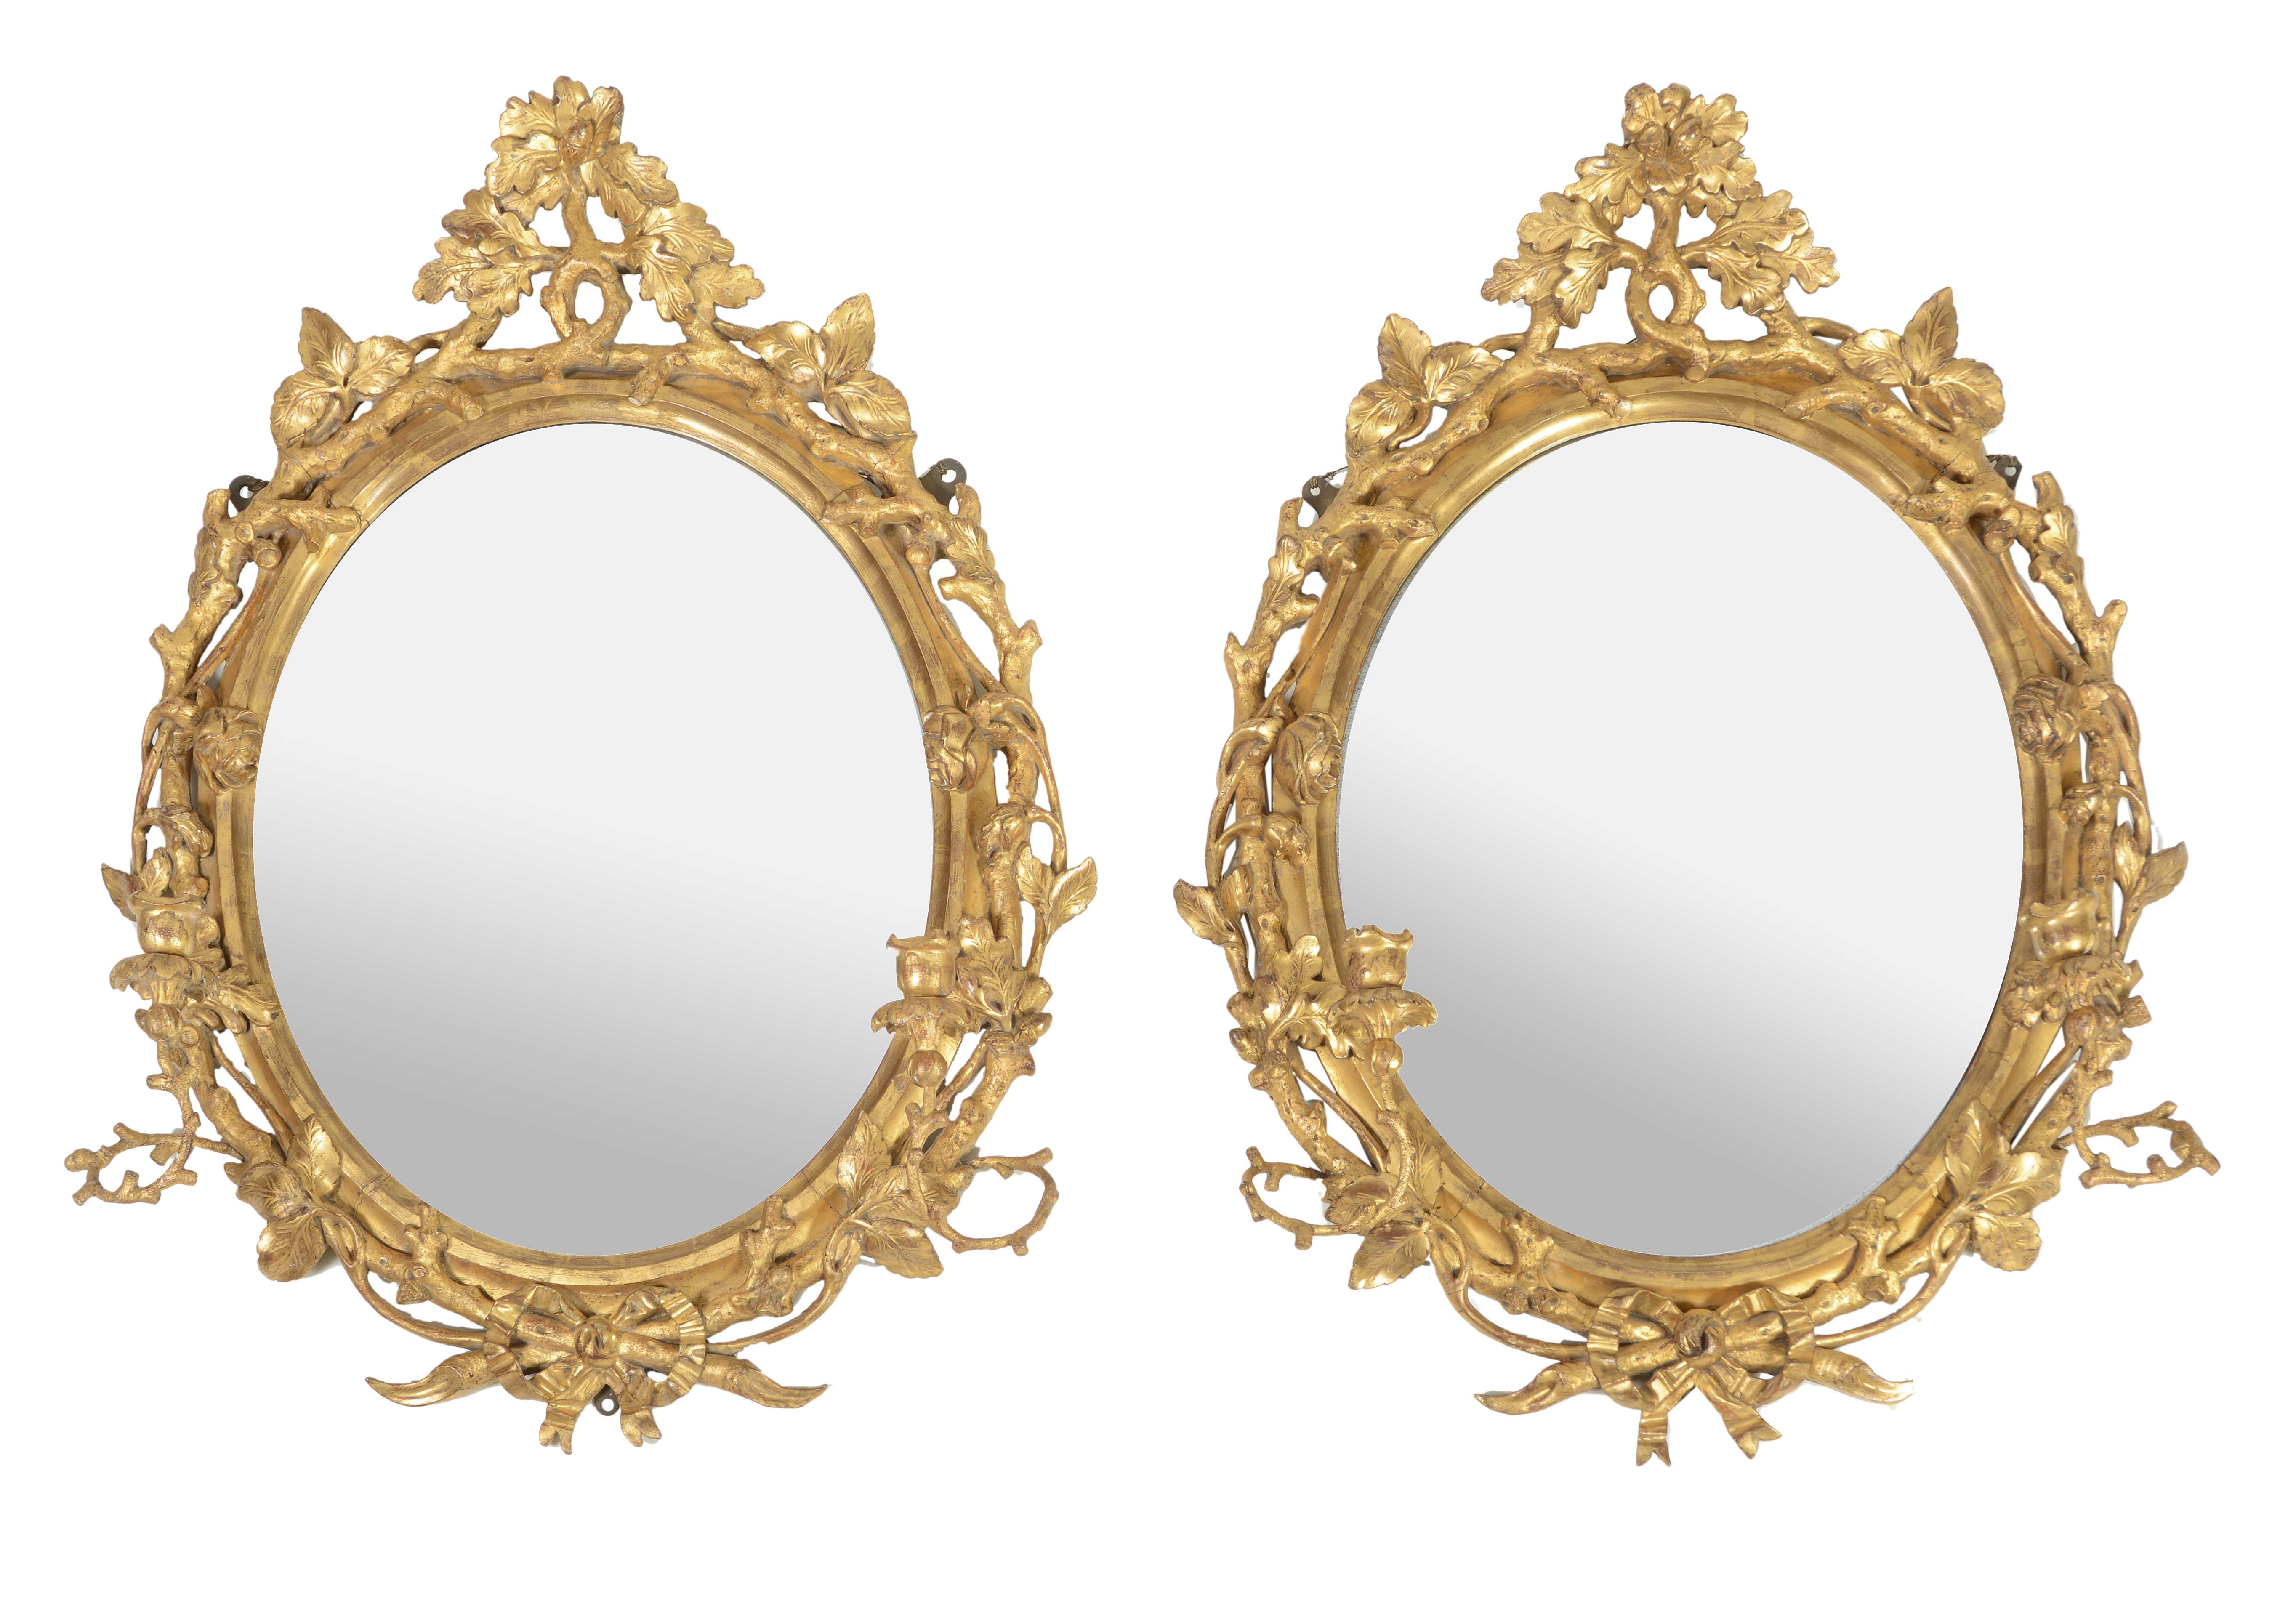 A pair of George III carved giltwood oval girandole wall mirrors, circa 1760 A pair of George III